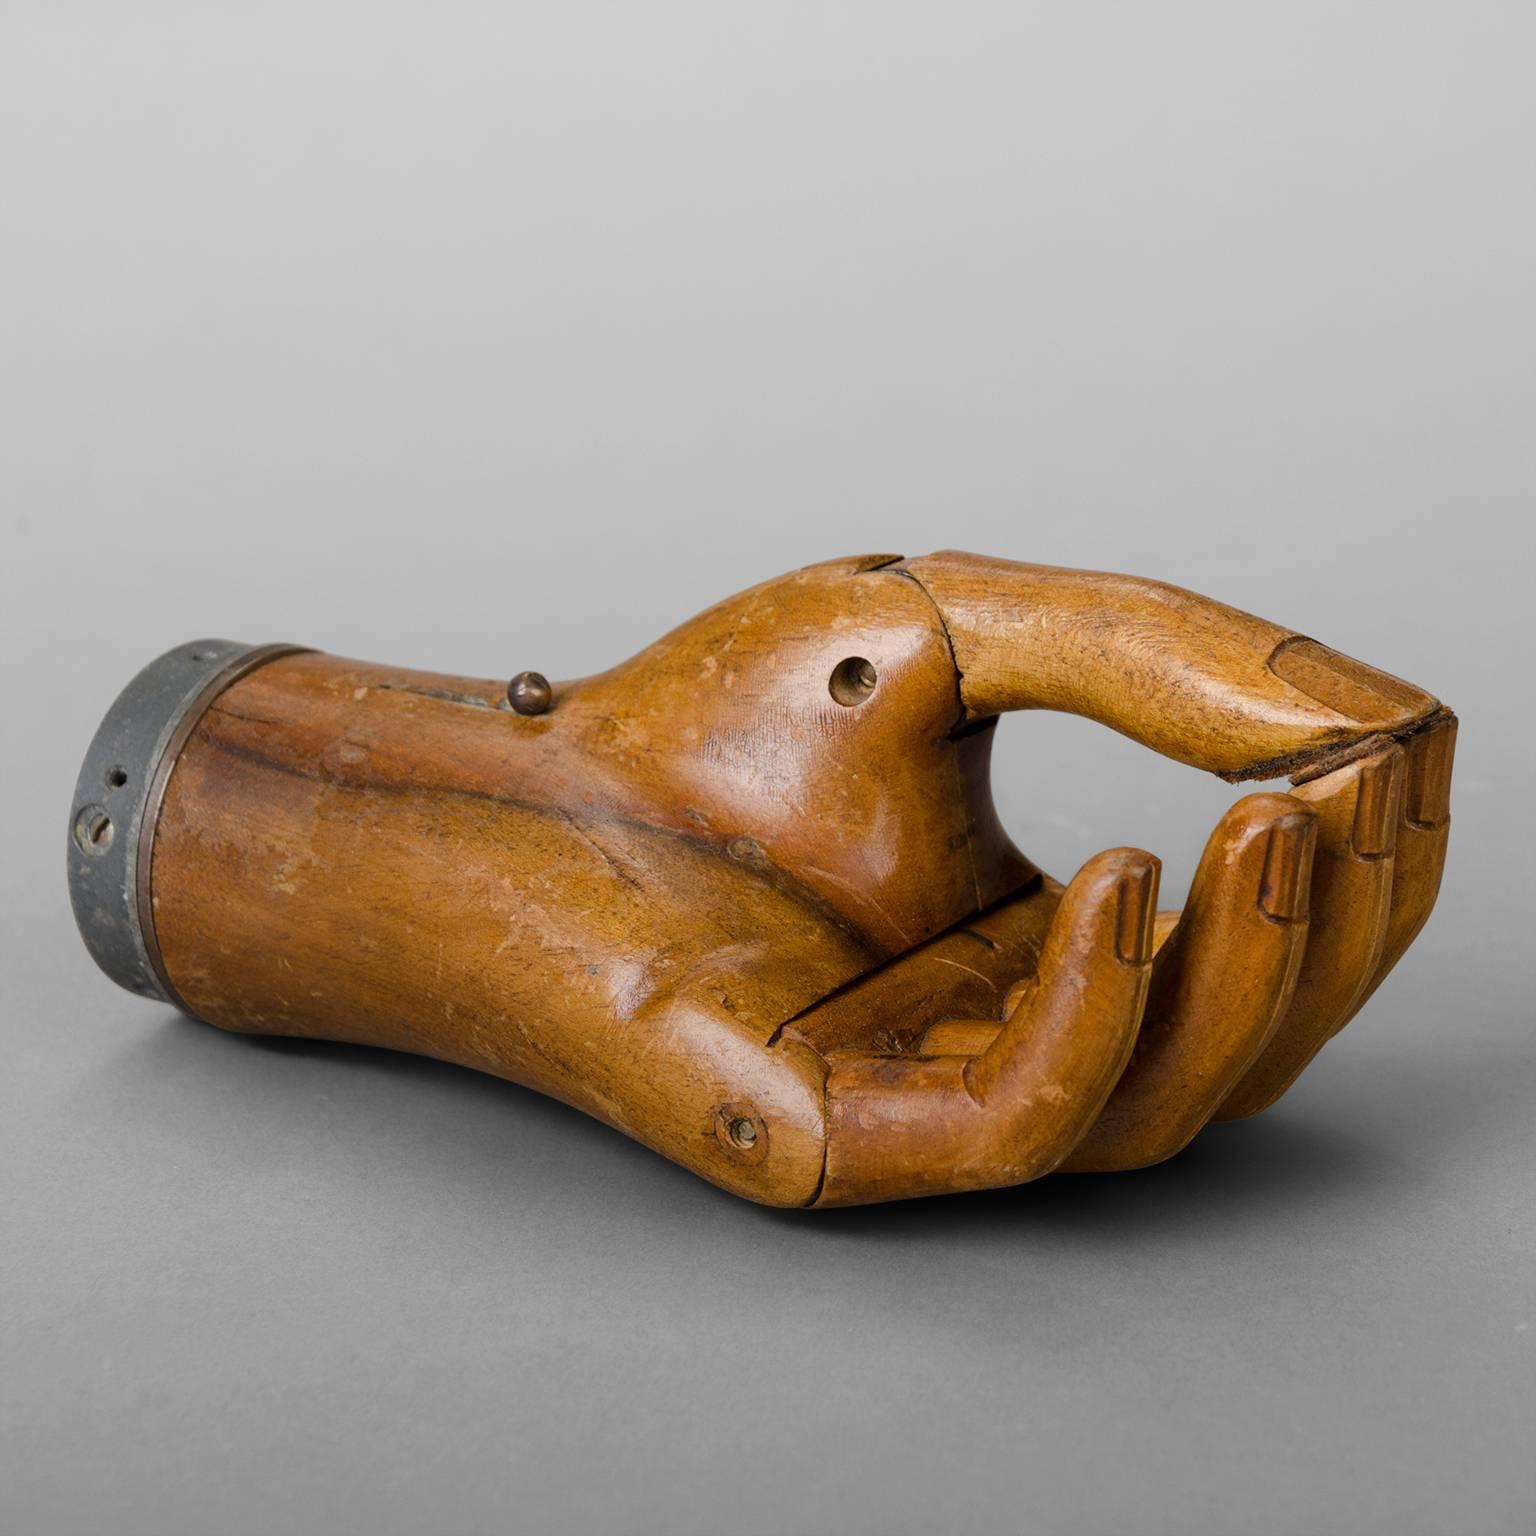 Carved Hand Prosthesis with Mechanical Joint, circa1920